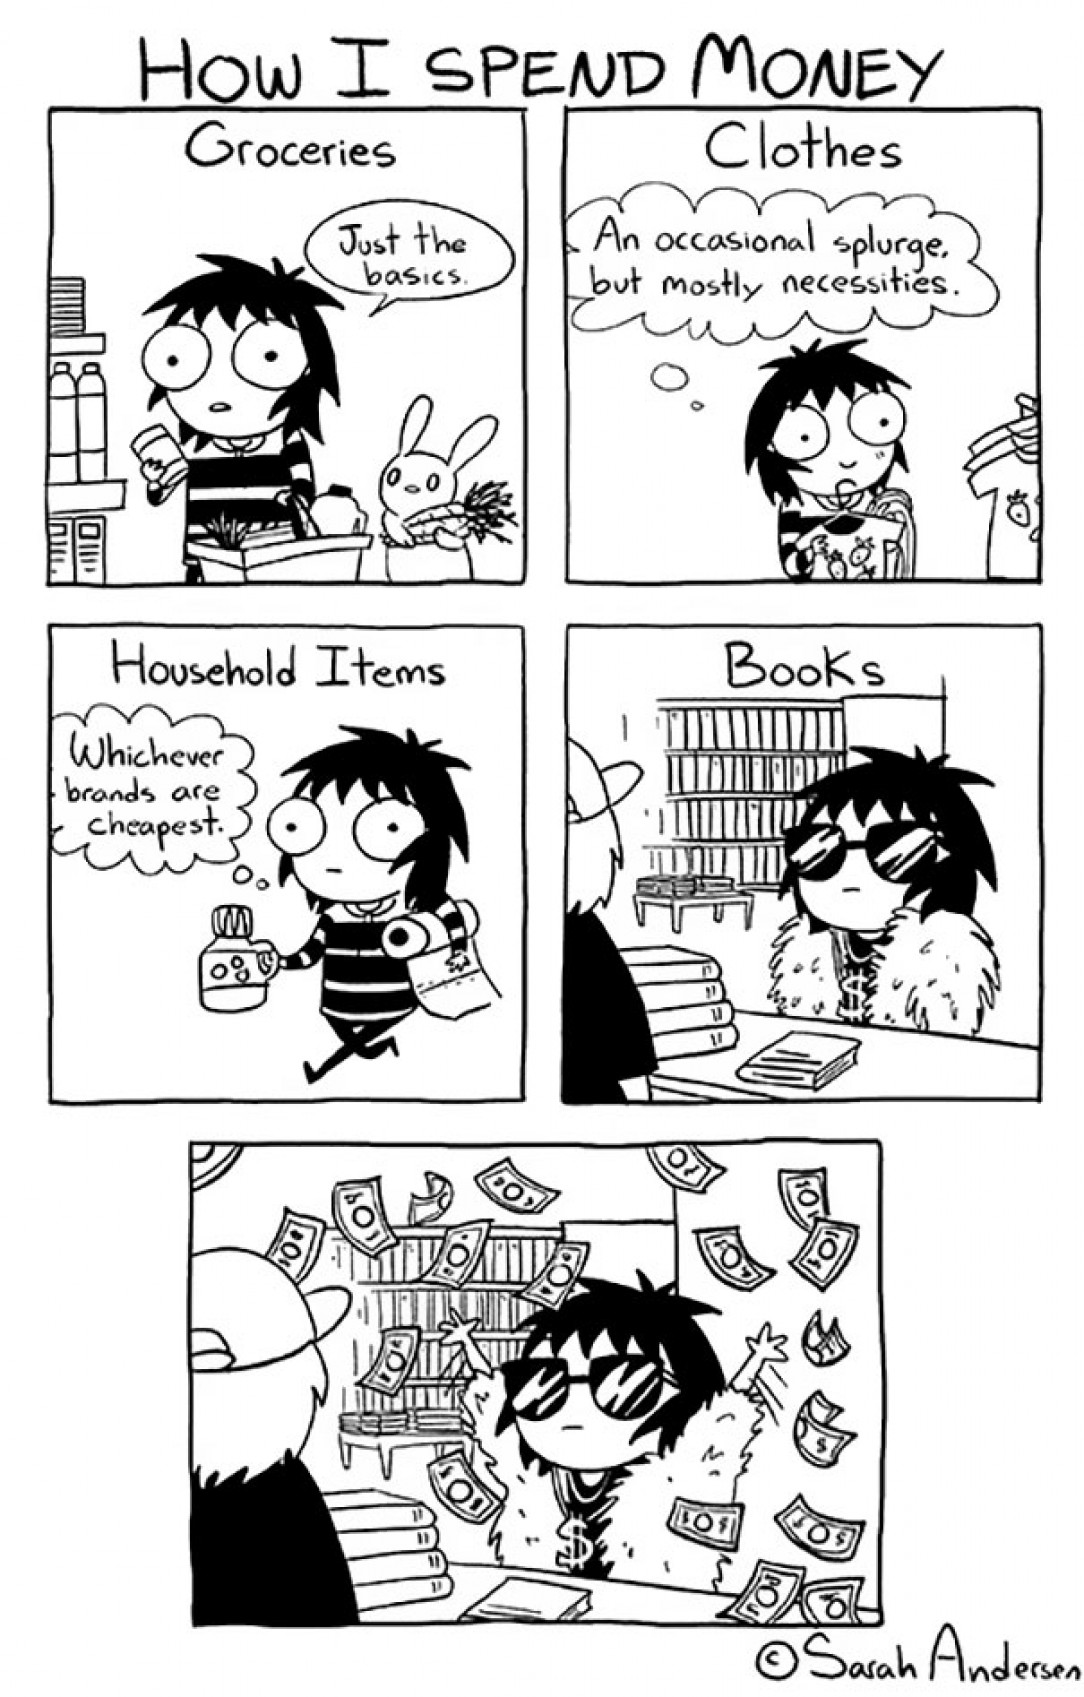 How do you spend money? (comic by Sarah Andersen)